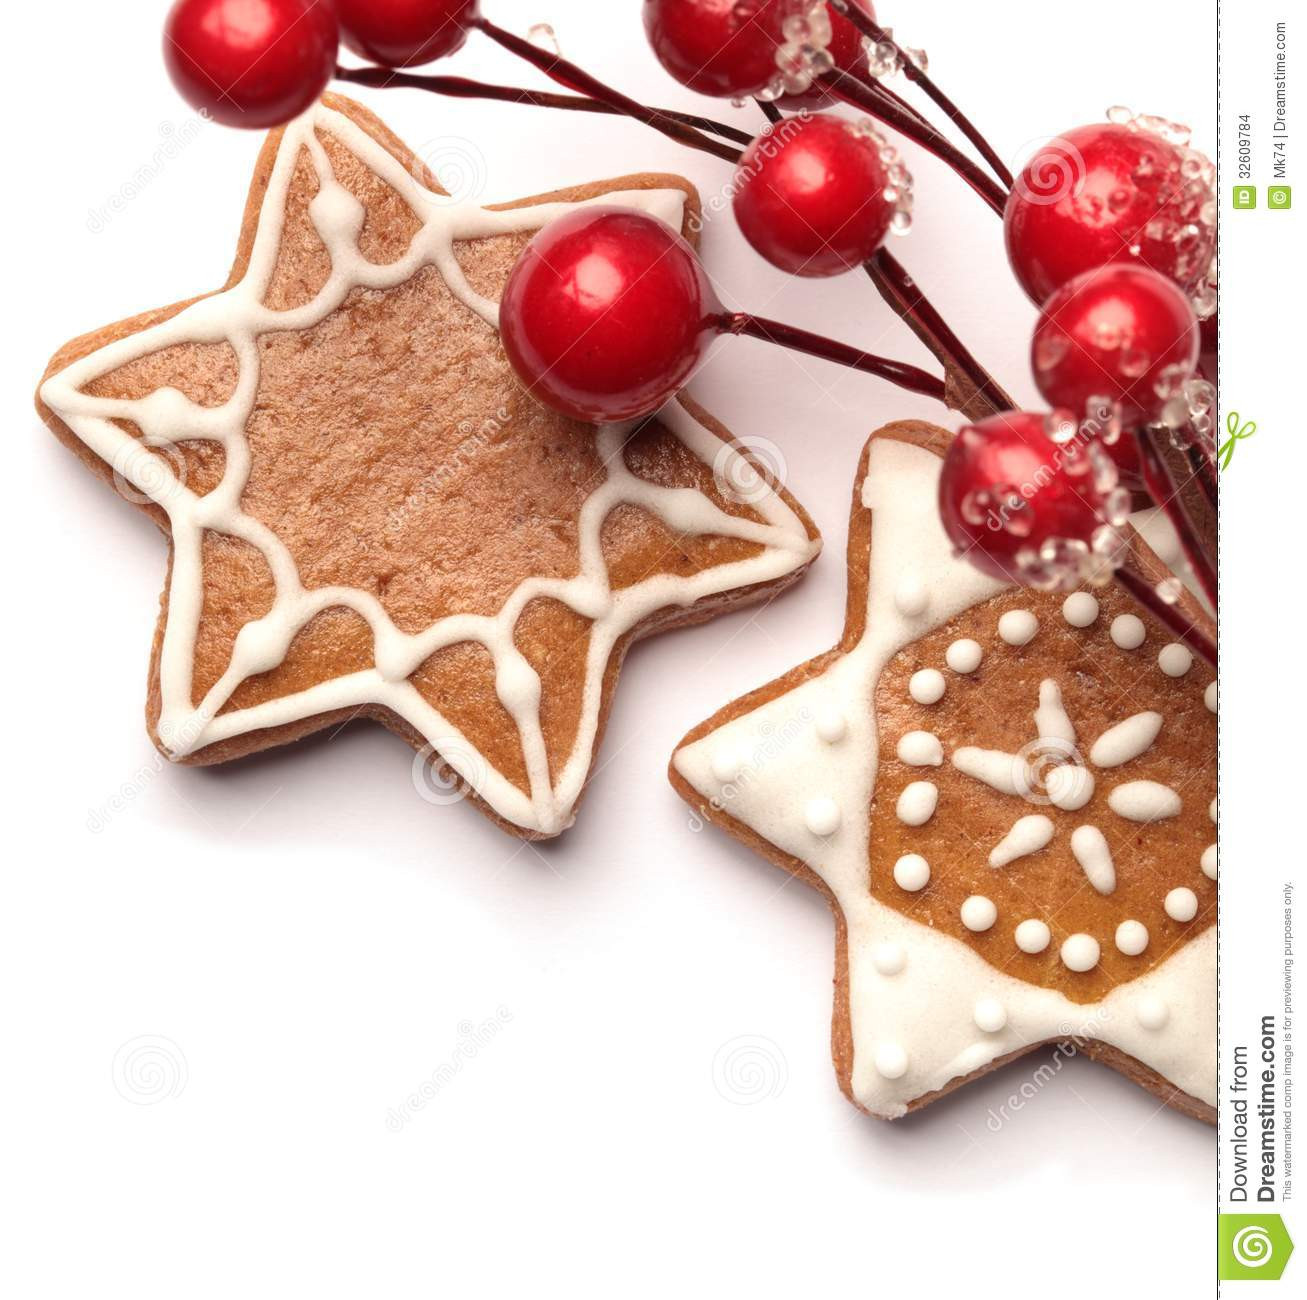 Christmas Cookies Background
 Holiday Cookies Stock Image